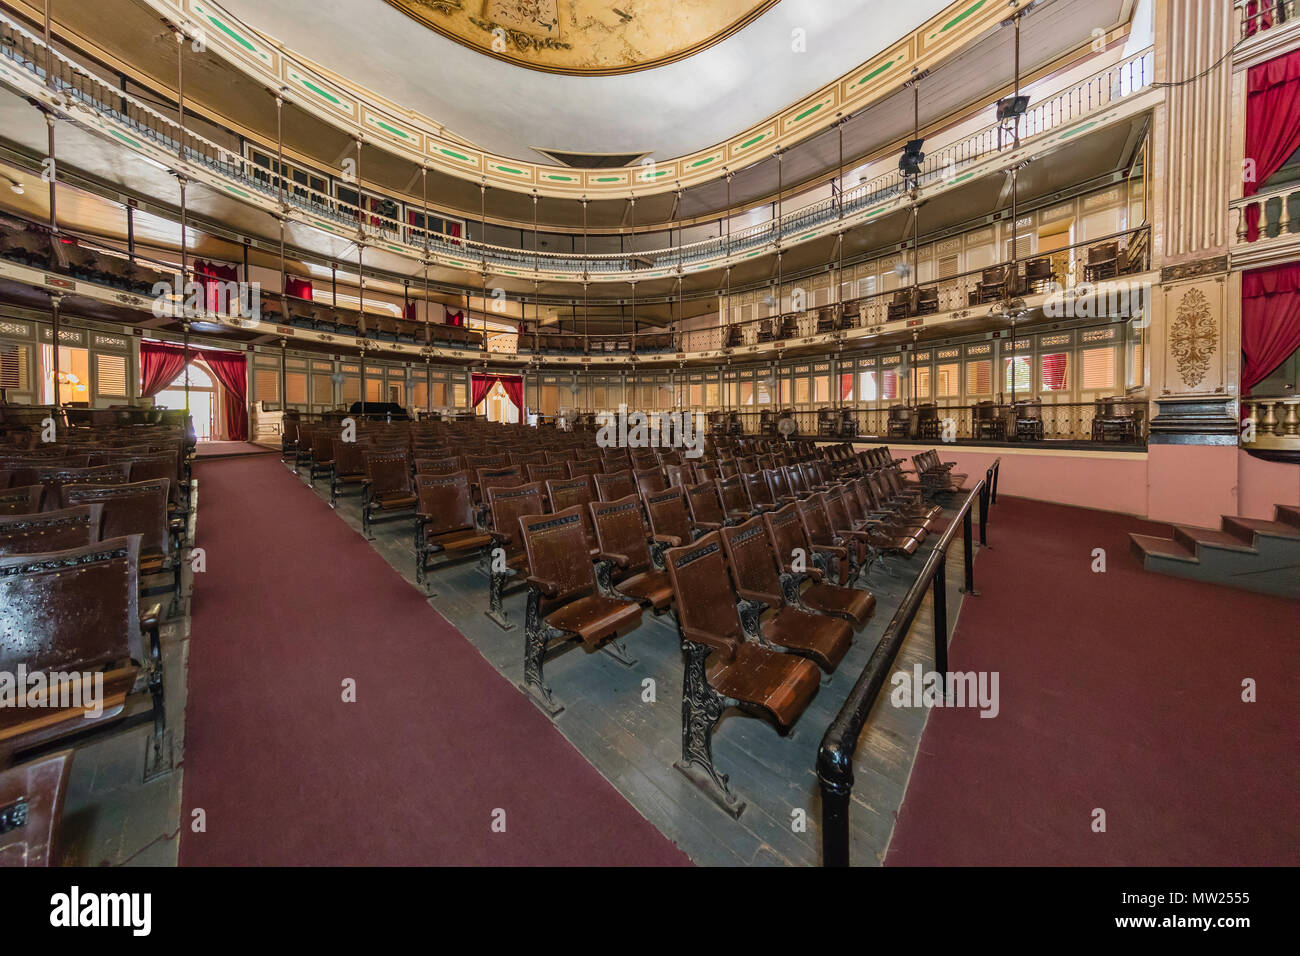 Interior view of the Teatro TomaÌs Terry, Tomas Terry Theatre, opened in 1890 in the city of Cienfuegos, Cuba. Stock Photo